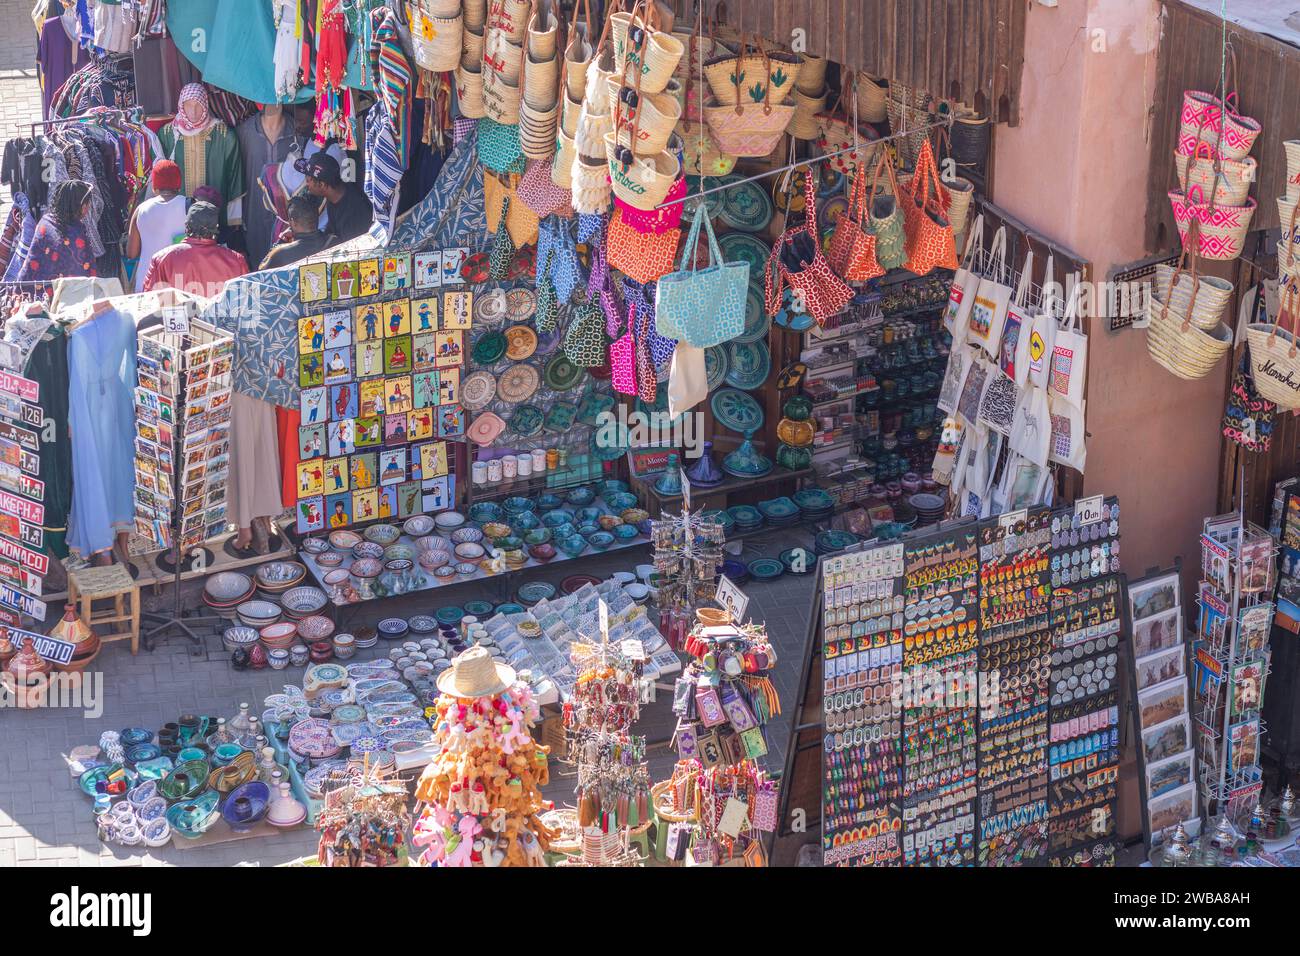 Items for sale in the souk, Morocco Stock Photo